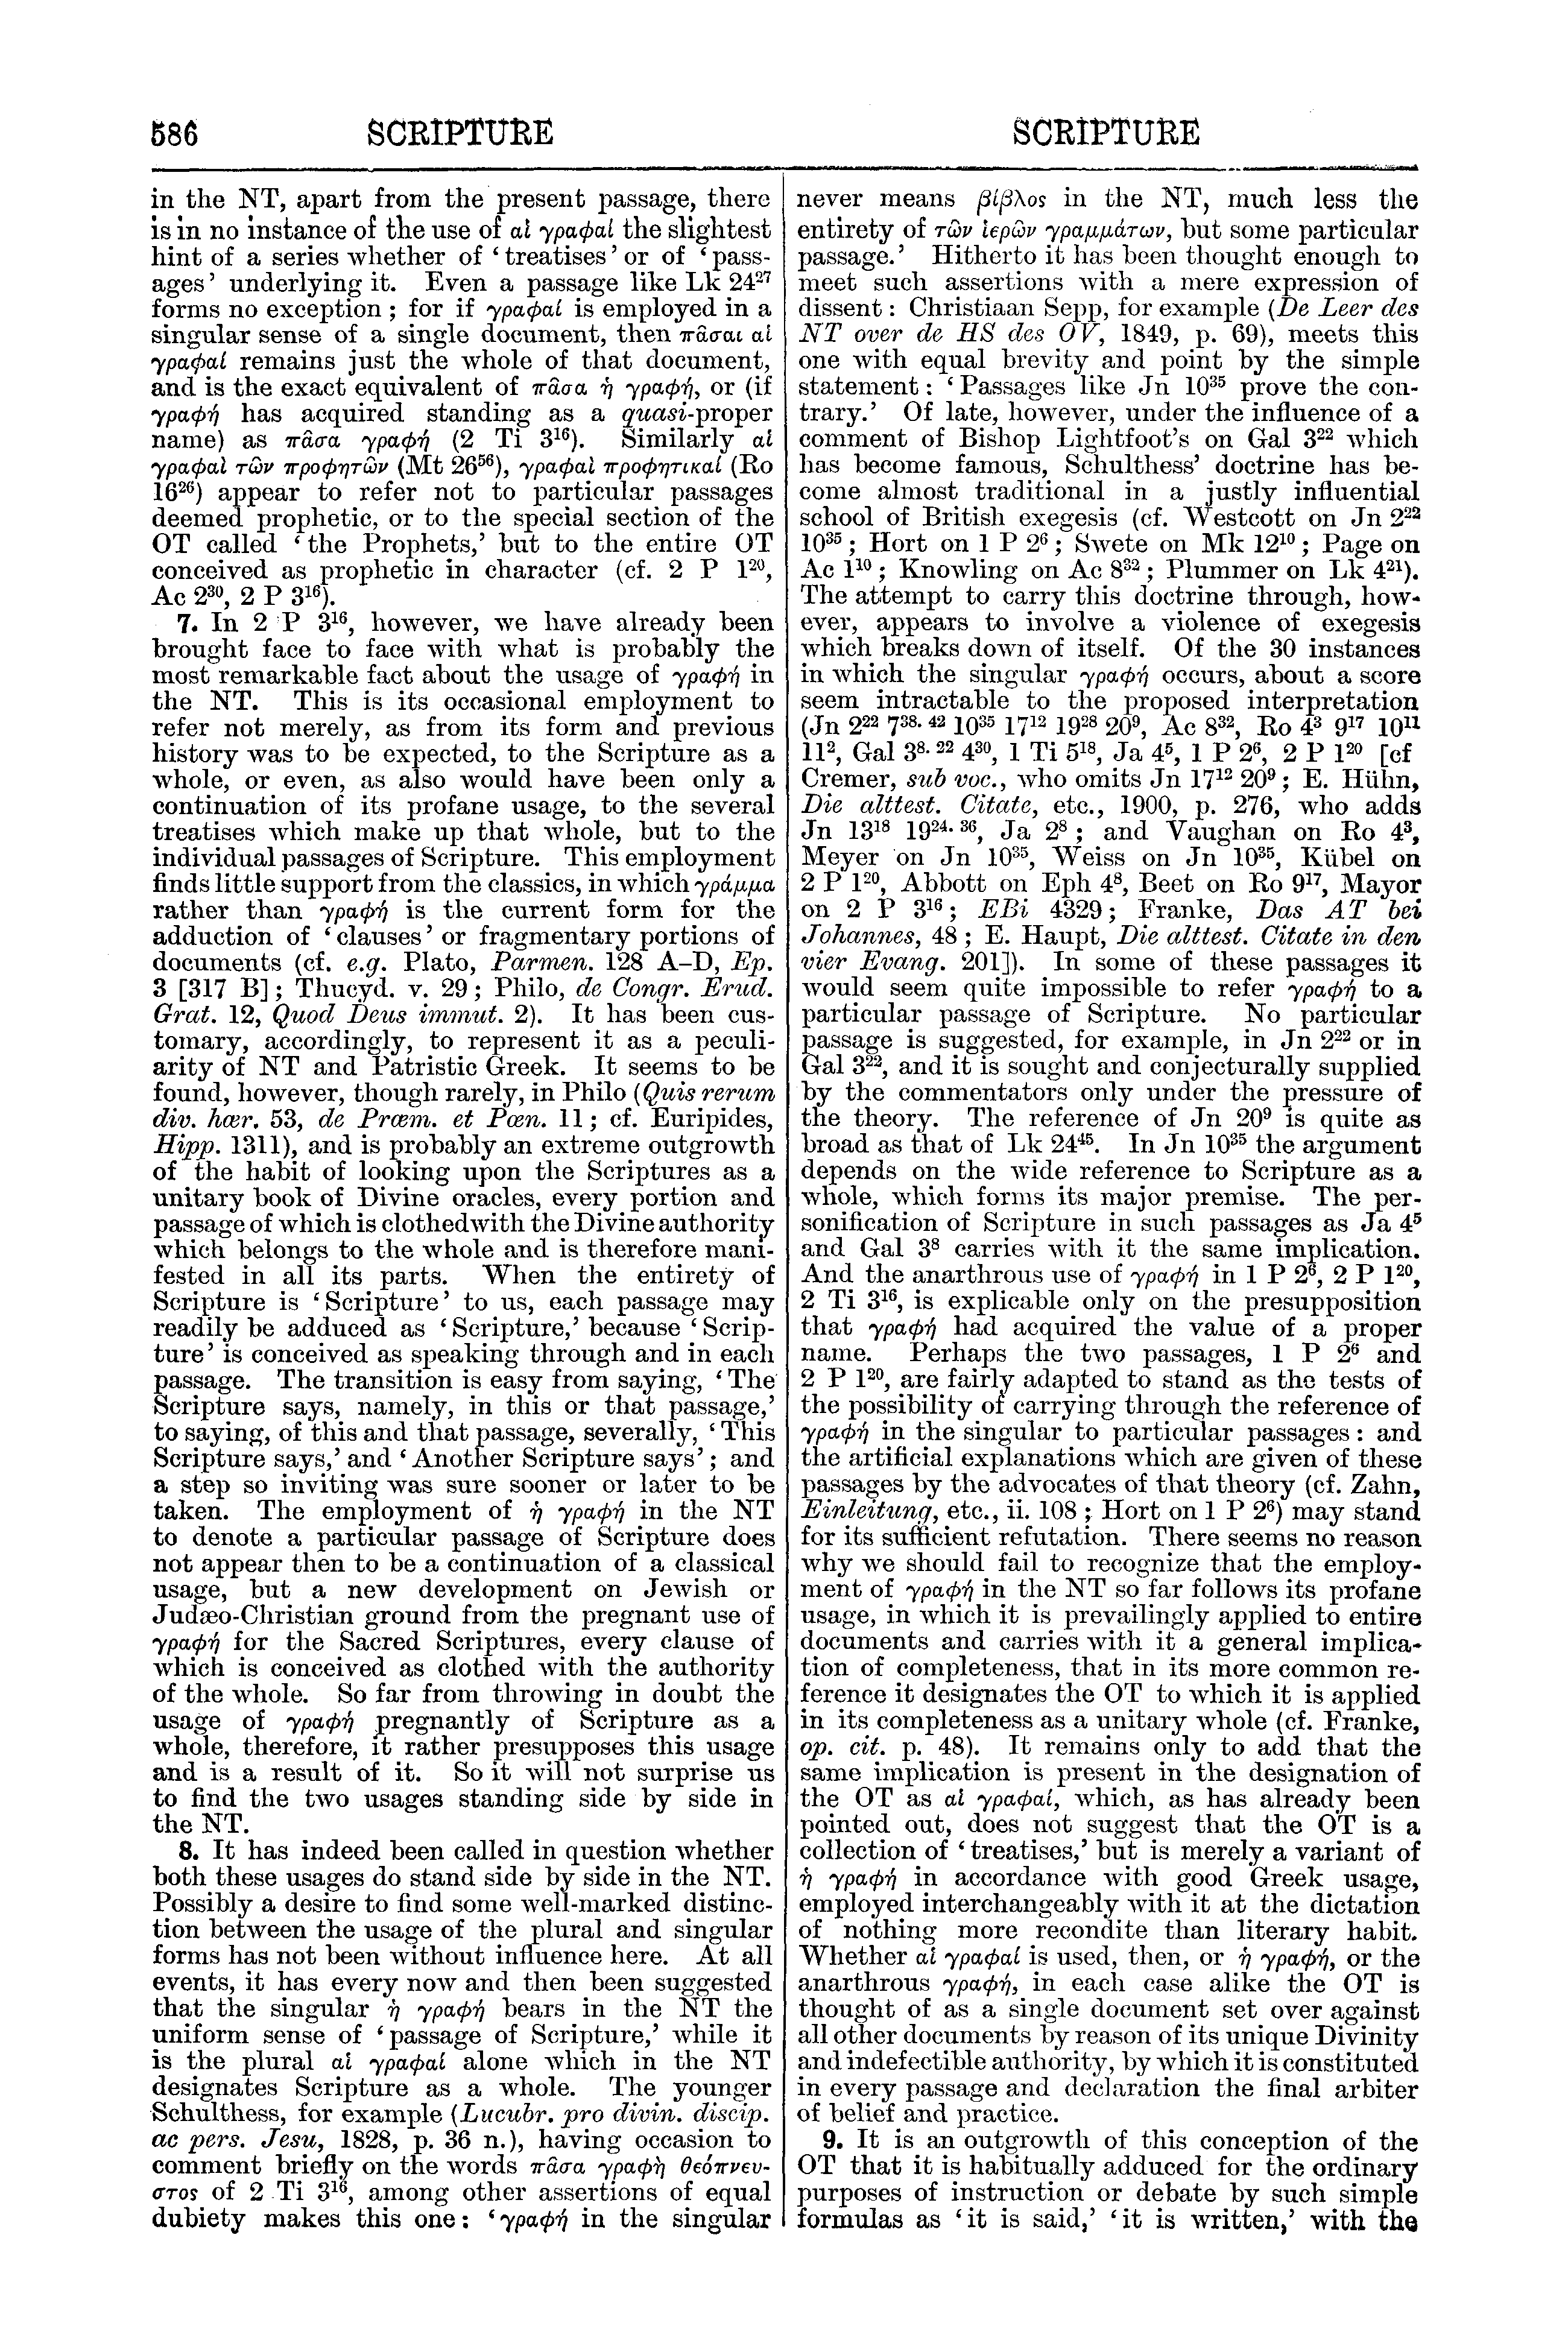 Image of page 586